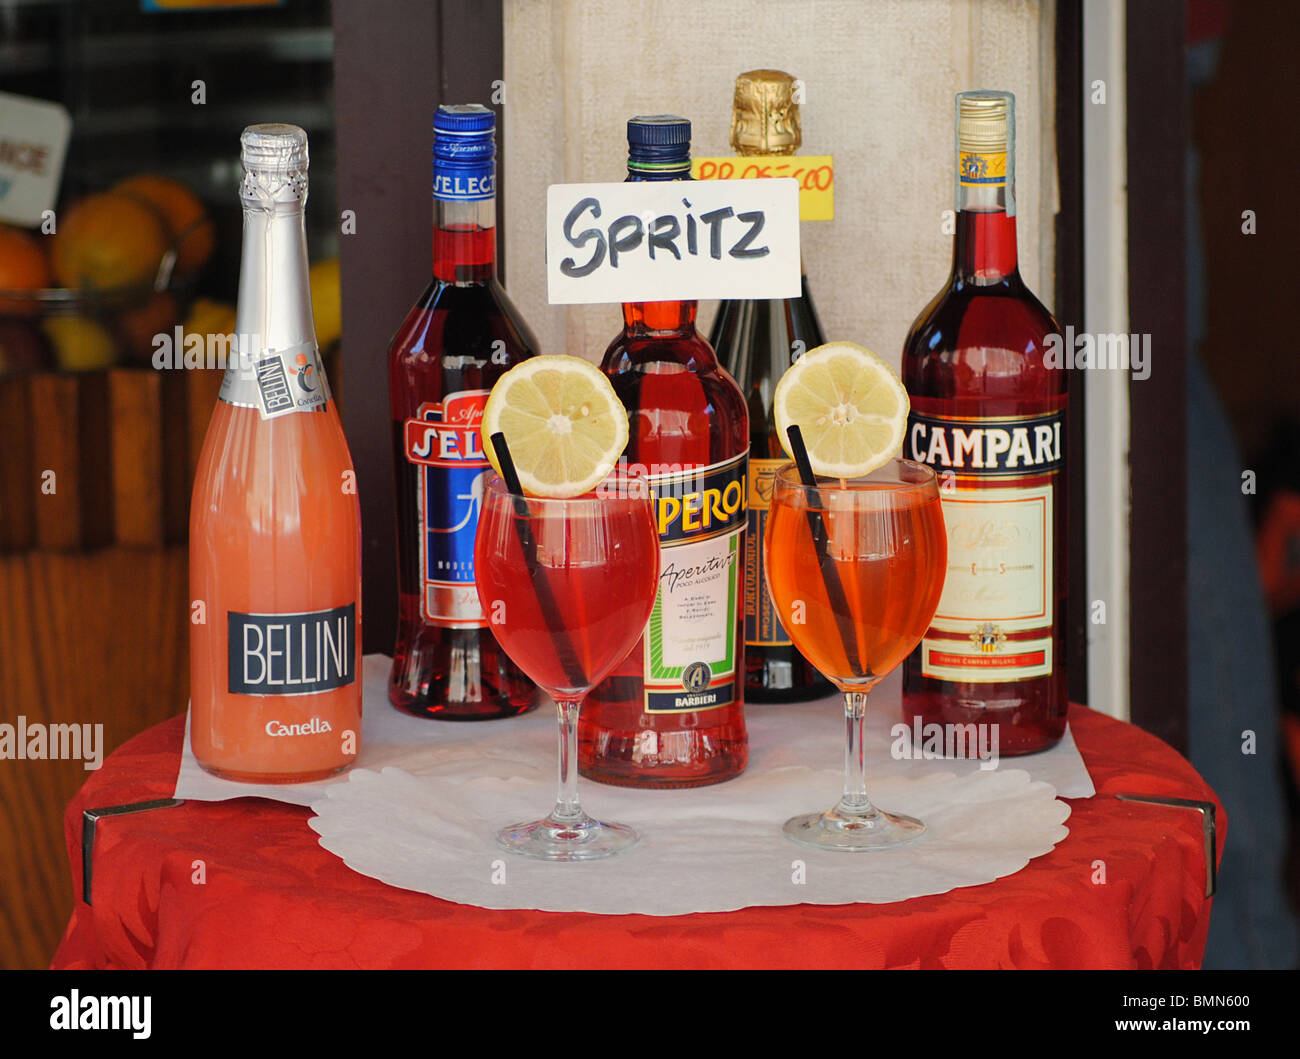 A display of Spritz and Bellini at a bar in Venice, Italy Stock Photo